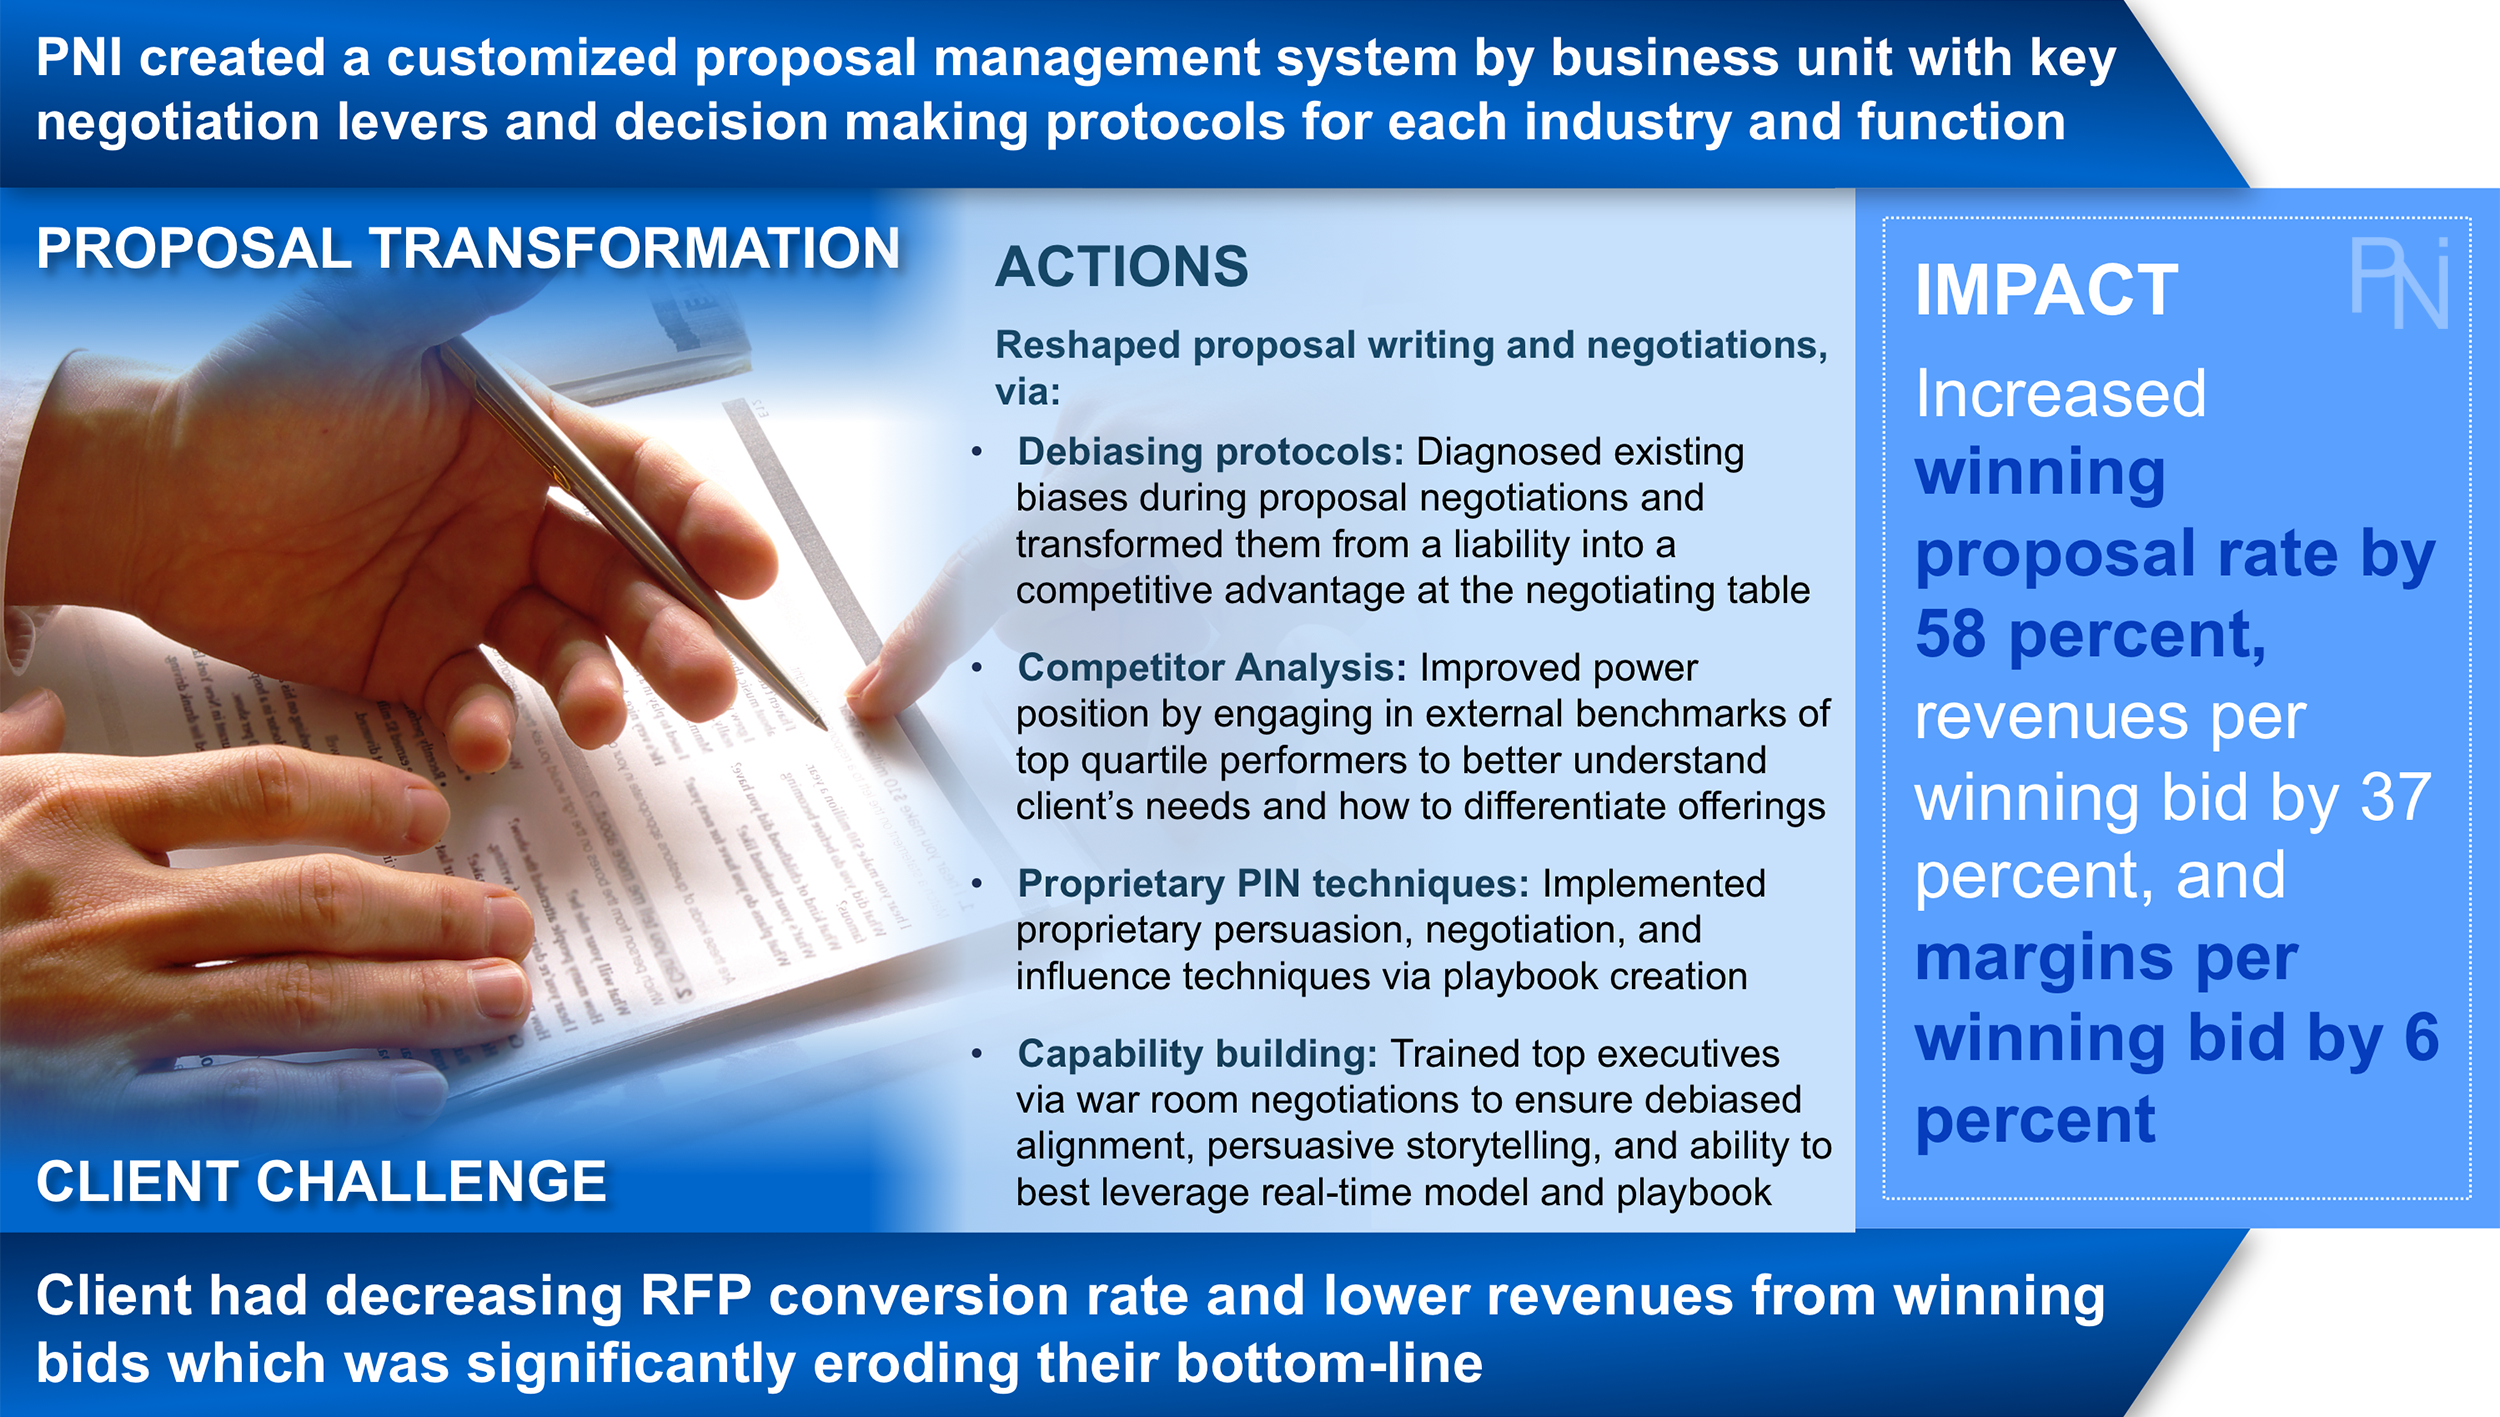 Proposal Management Results 2 - PNI.png